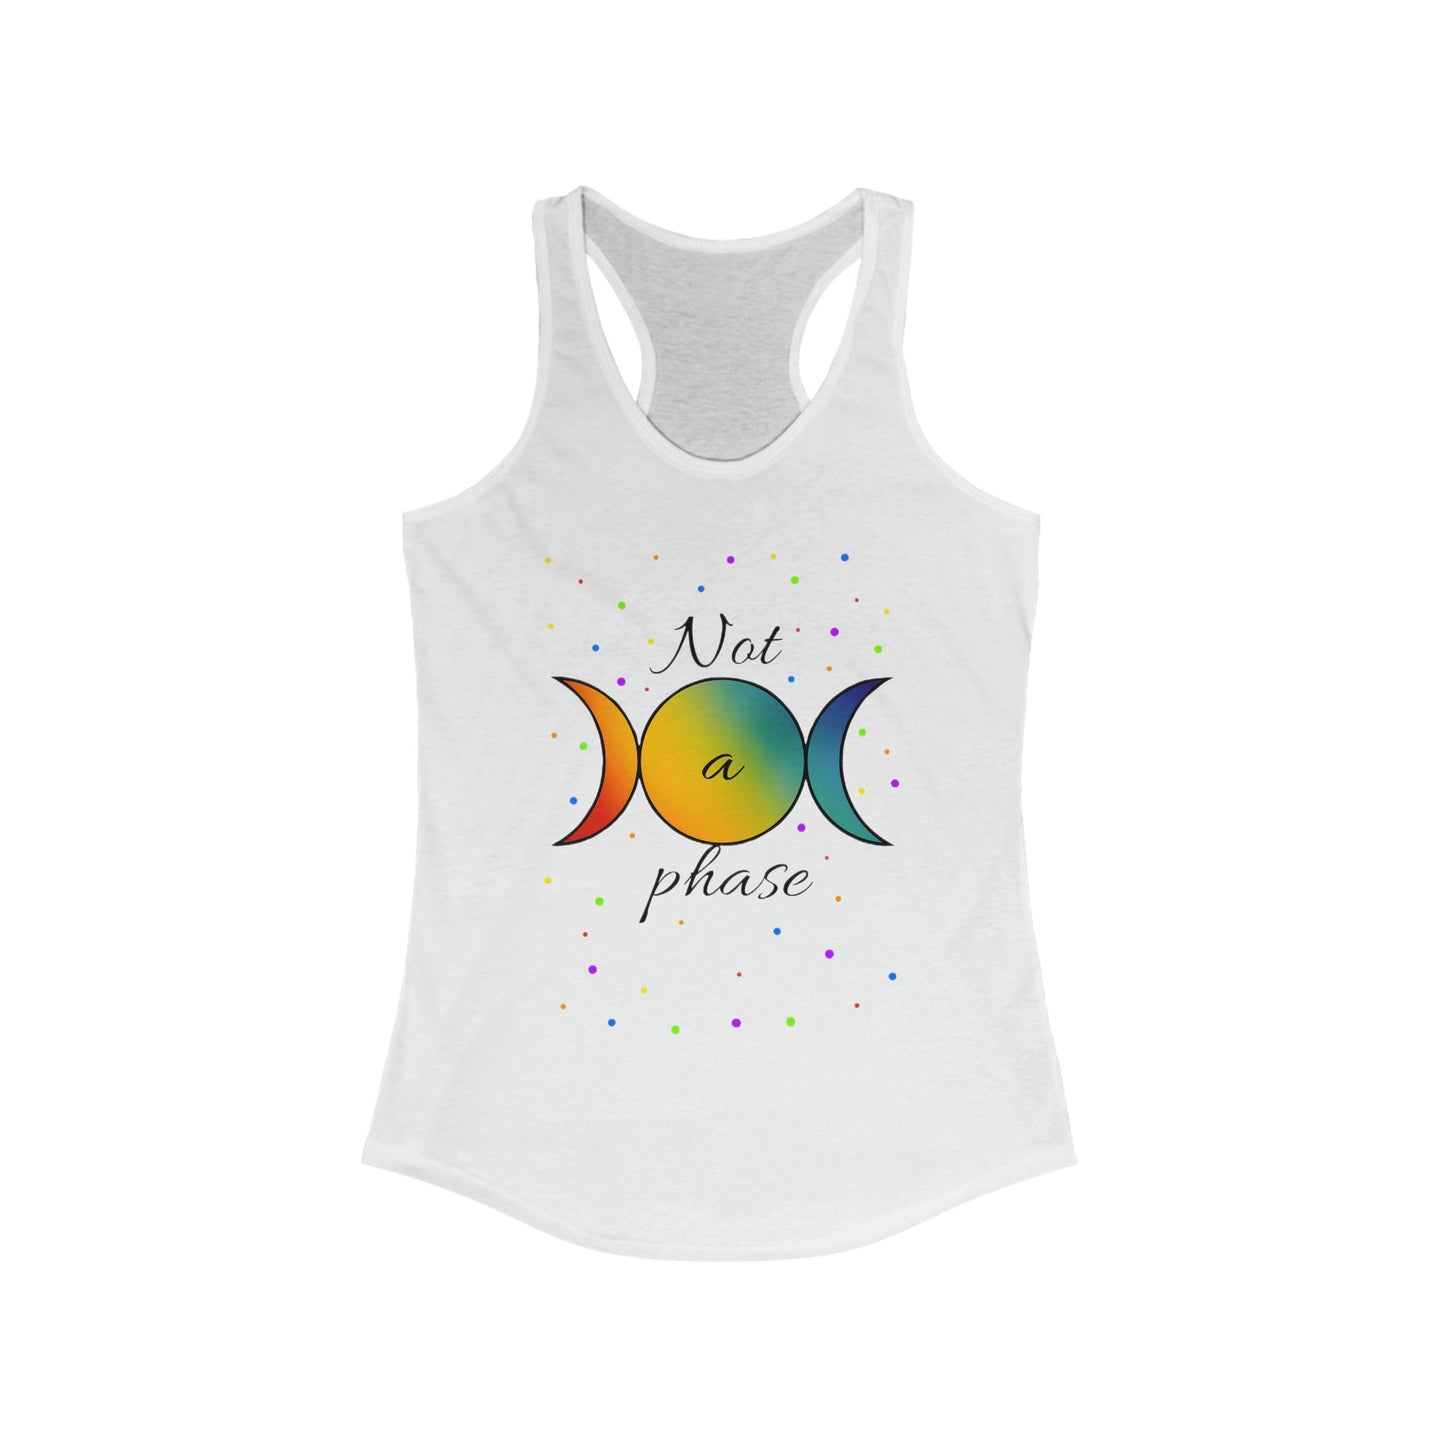 Not A Phase Witchy Pride Women's Racerback Tank Top ShirtTank TopVTZdesignsSSolid WhiteDTGmoonphases